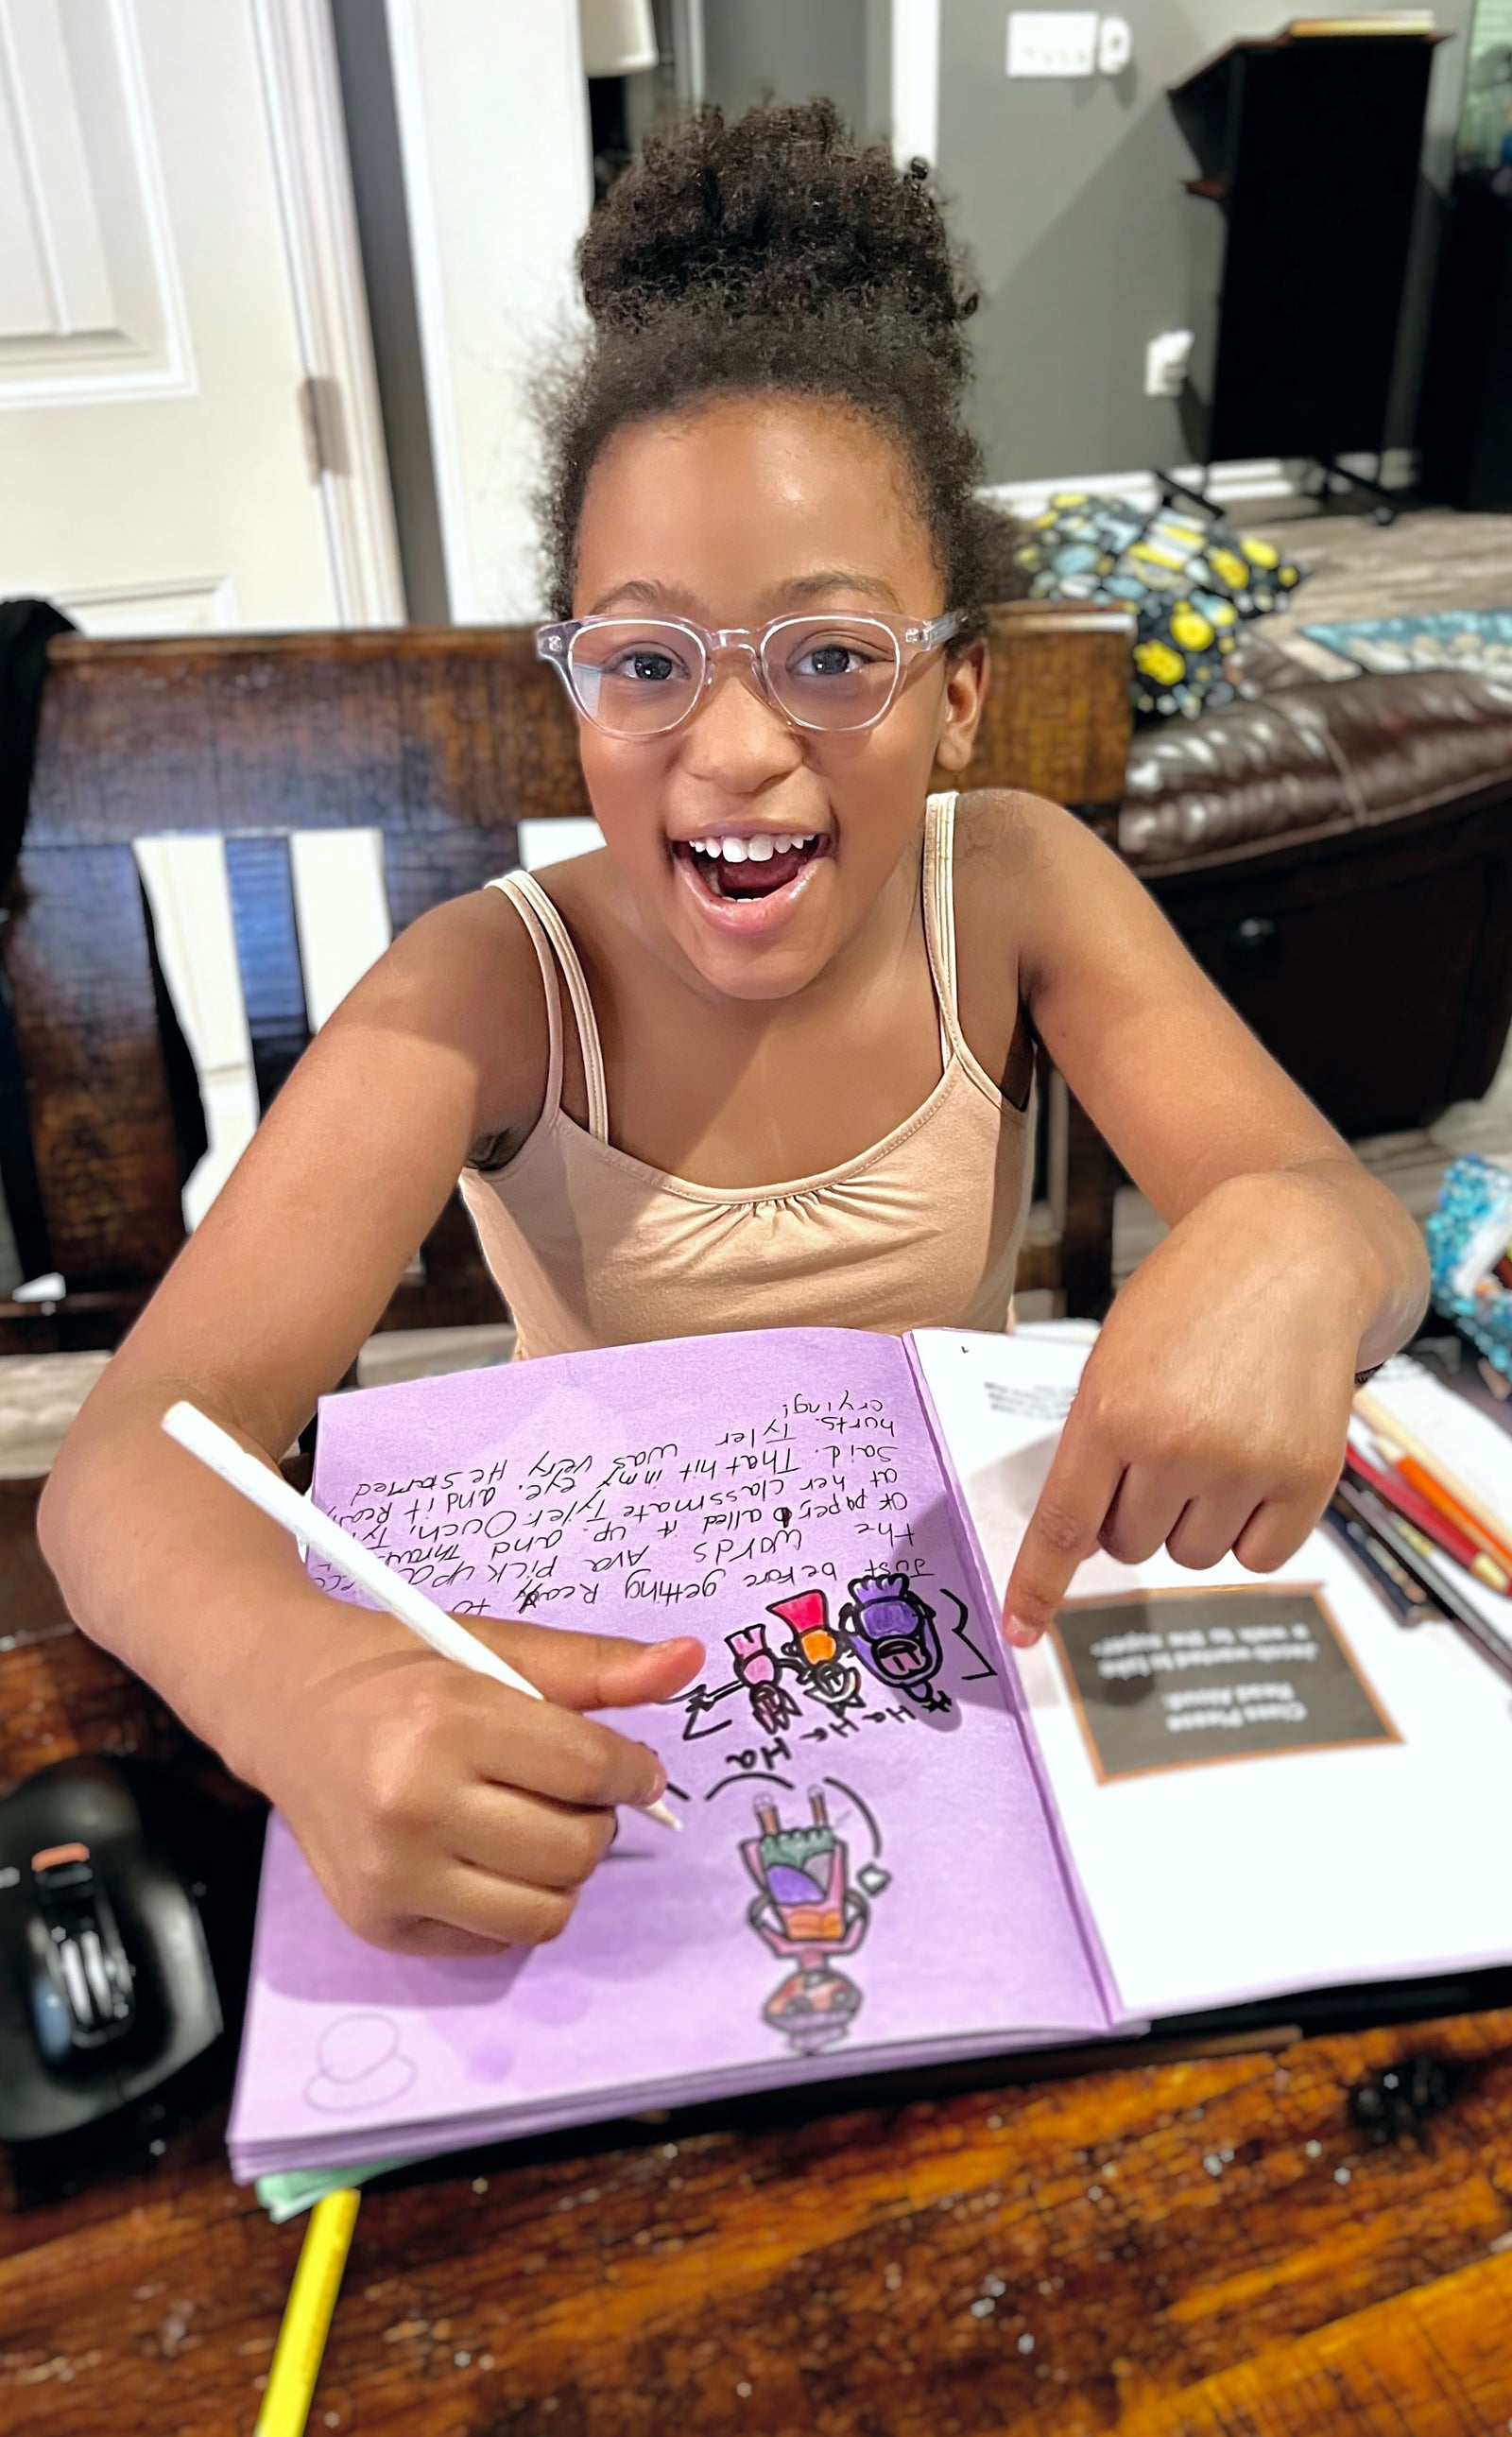 Ava's S.T.E.M. Hard Cover Autographed Book: Ava Discovers Her inner Genius using S.T.E.M.